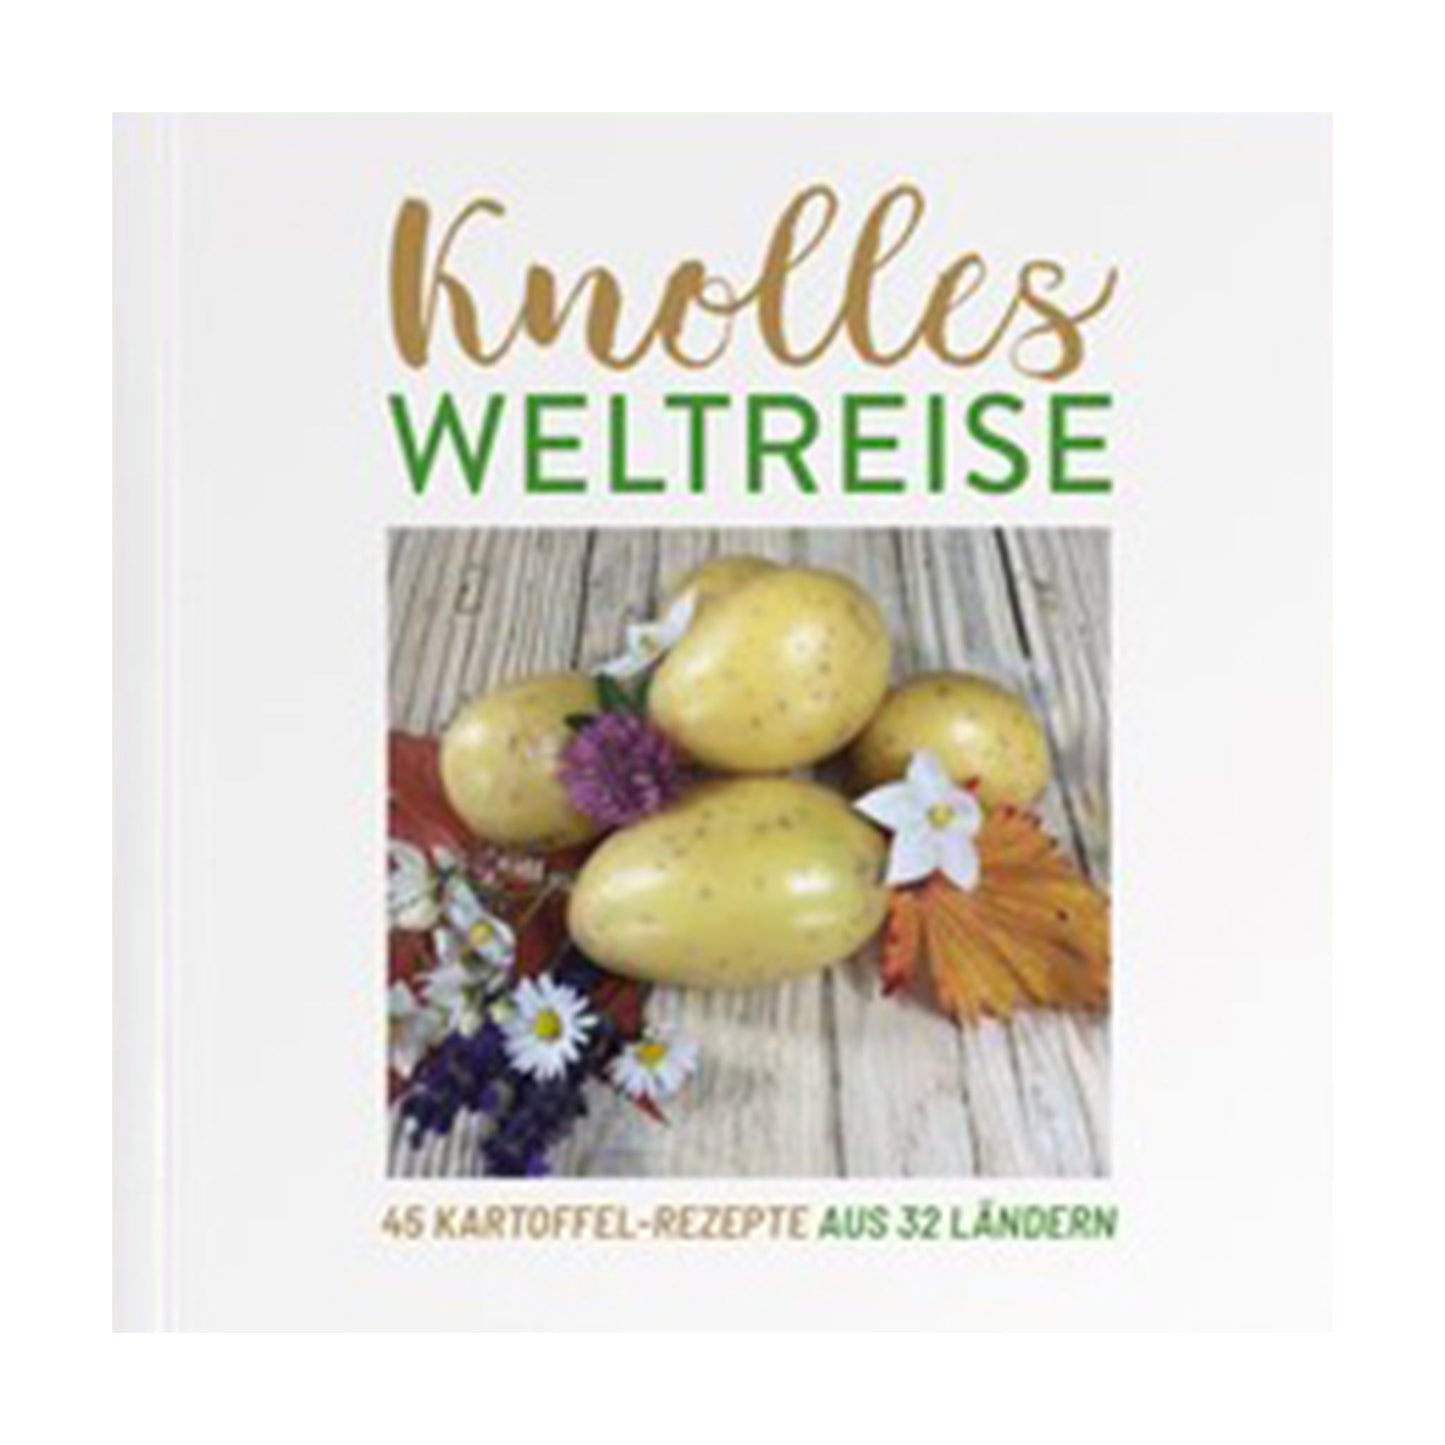 Cooking book "Knolles Weltreise"